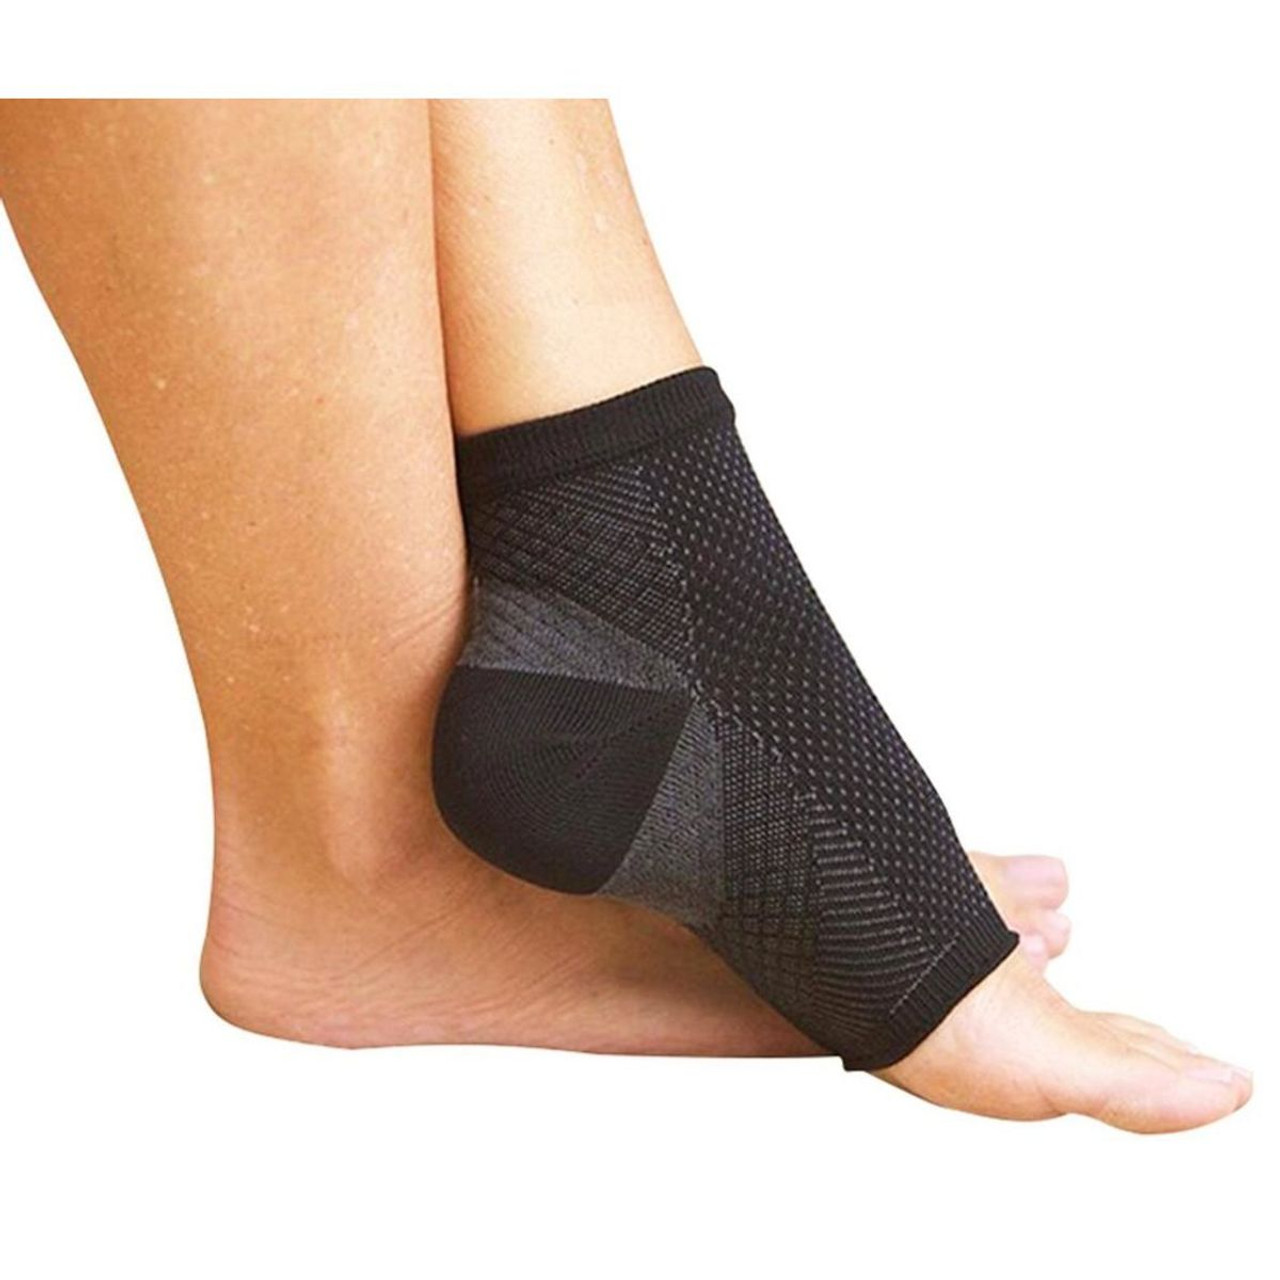 Anti-Fatigue Compression Ankle Sock product image